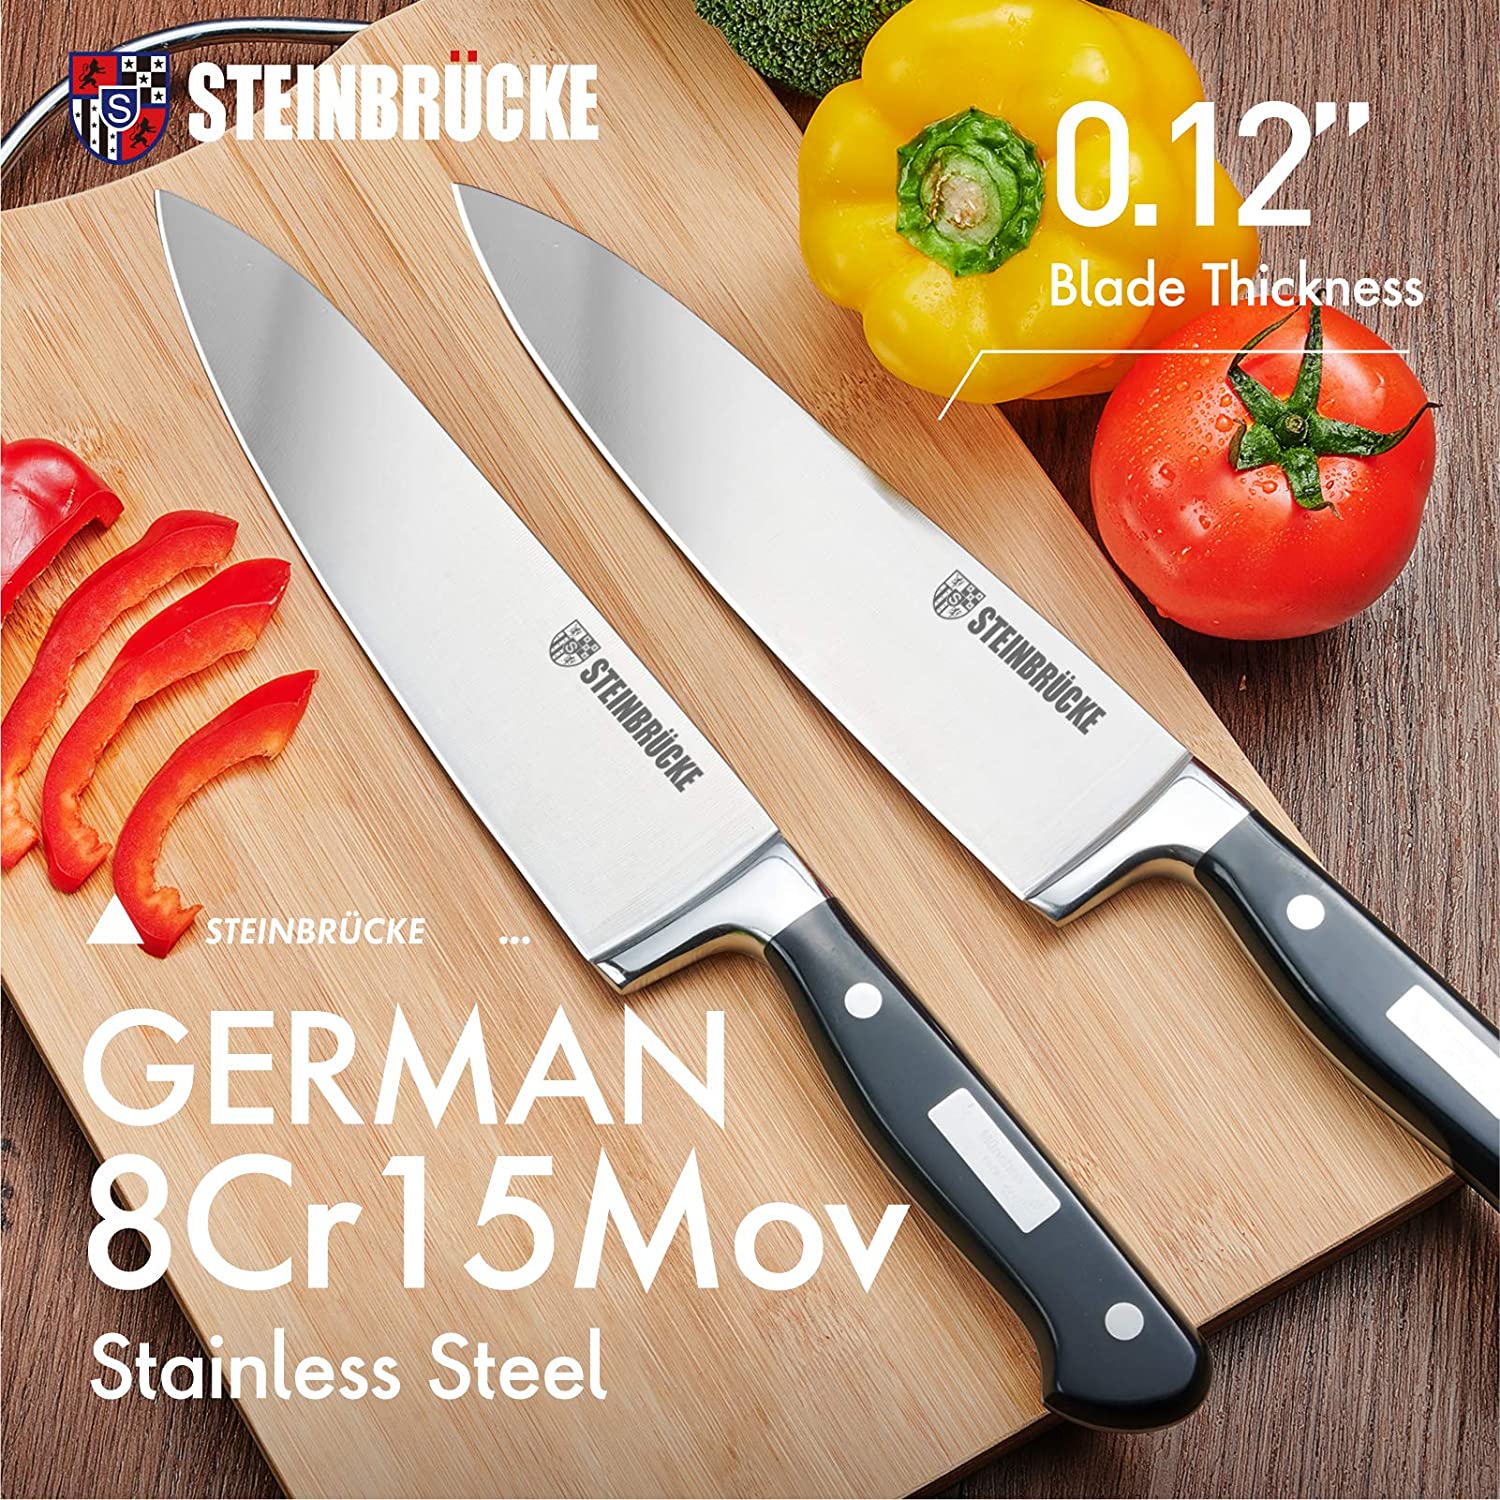 L1 Series 8-Inch Chef's Knife, White, Forged German Steel, 1026887